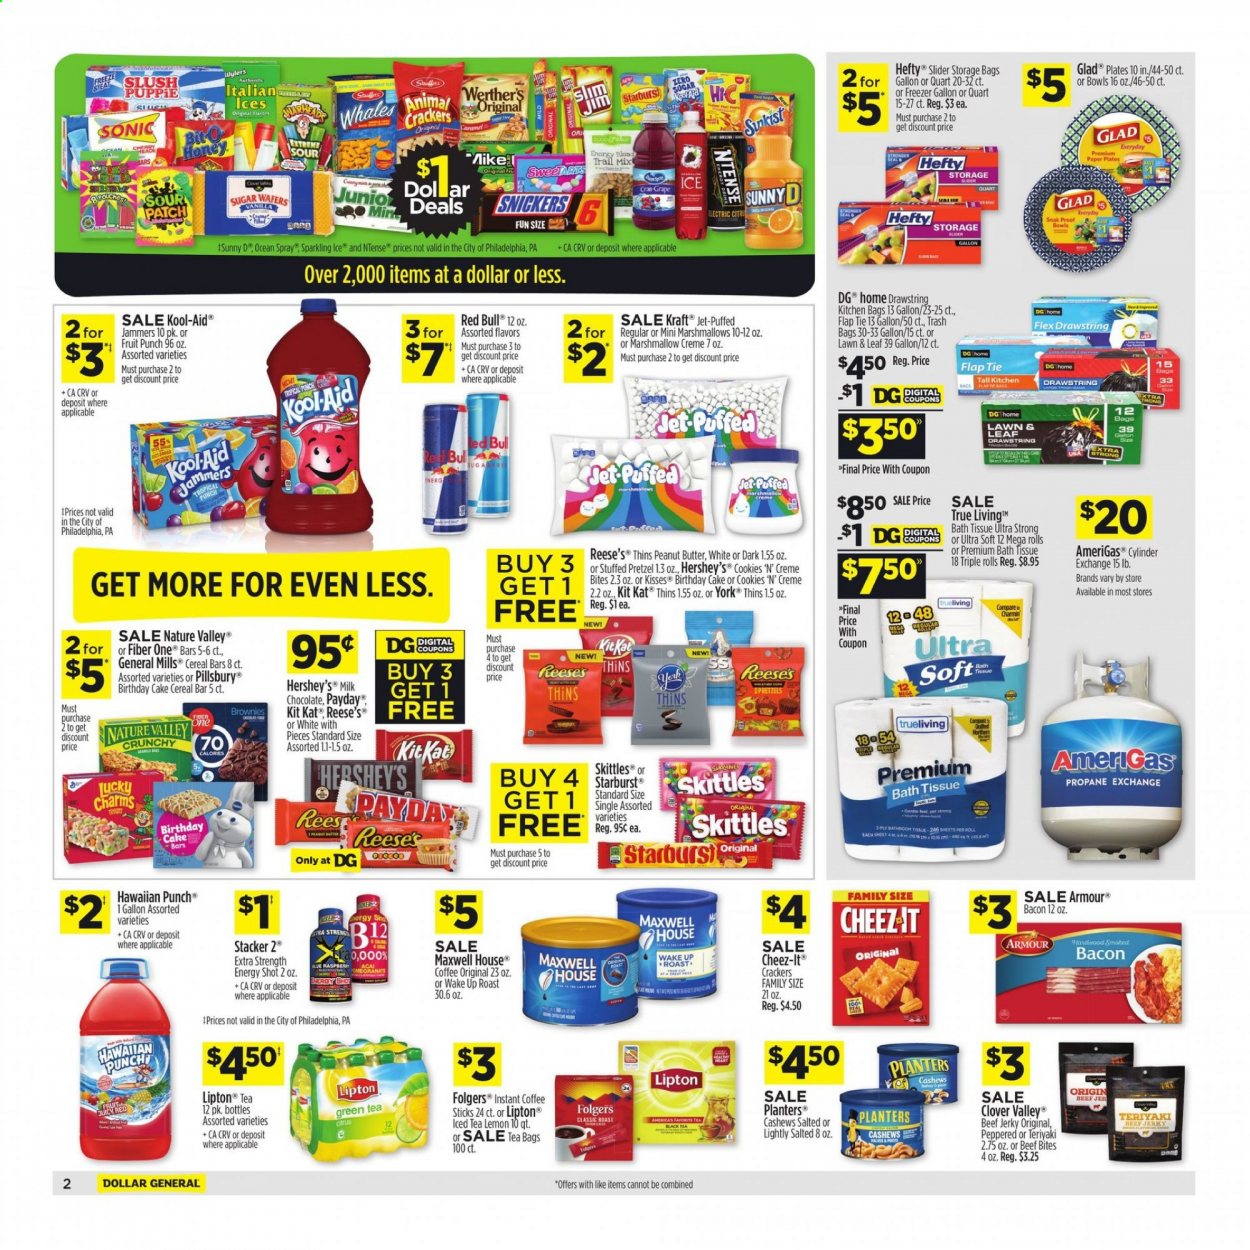 thumbnail - Dollar General Flyer - 07/04/2021 - 07/10/2021 - Sales products - pretzels, cake, Pillsbury, Kraft®, bacon, beef jerky, jerky, Clover, Reese's, Hershey's, cookies, milk chocolate, wafers, chocolate, Snickers, KitKat, cereal bar, crackers, Skittles, Starburst, Sour Patch, Thins, Cheez-It, cereals, Nature Valley, Fiber One, peanut butter, cashews, Planters, Lipton, Red Bull, fruit punch, green tea, Maxwell House, tea bags, instant coffee, Folgers, bath tissue, Jet, Hefty, trash bags, storage bag, plate, freezer, AmeriGas, car battery. Page 3.